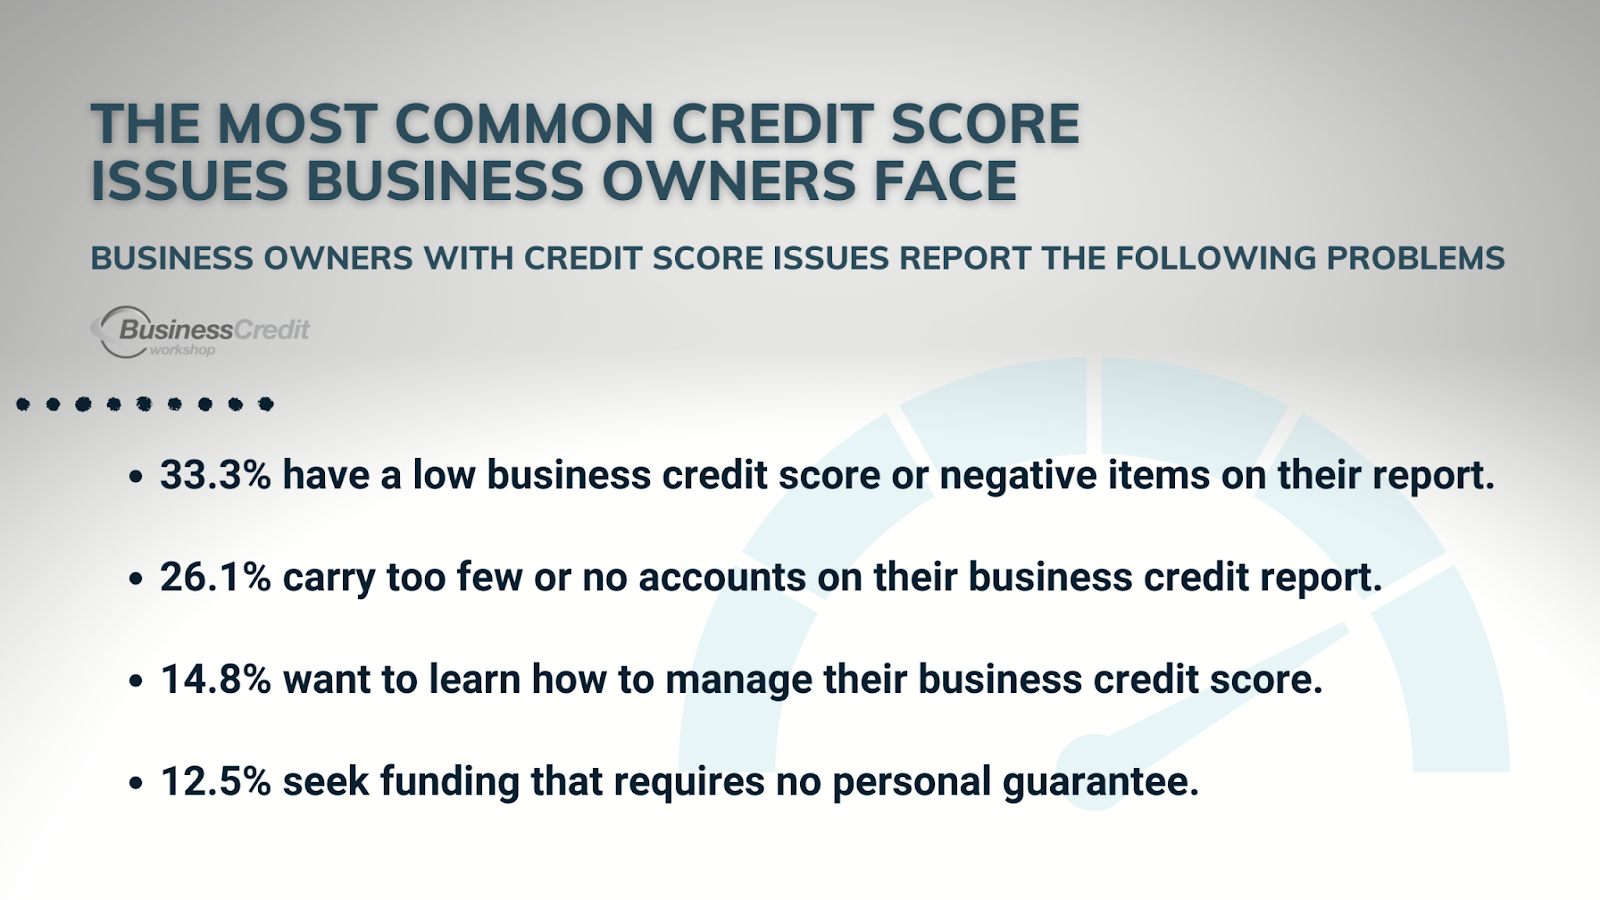 The most common credit score issues business owners face are low credit score, too few or no accounts reporting, no idea how to manage their business credit score, and a lack of no-PG funding options. 